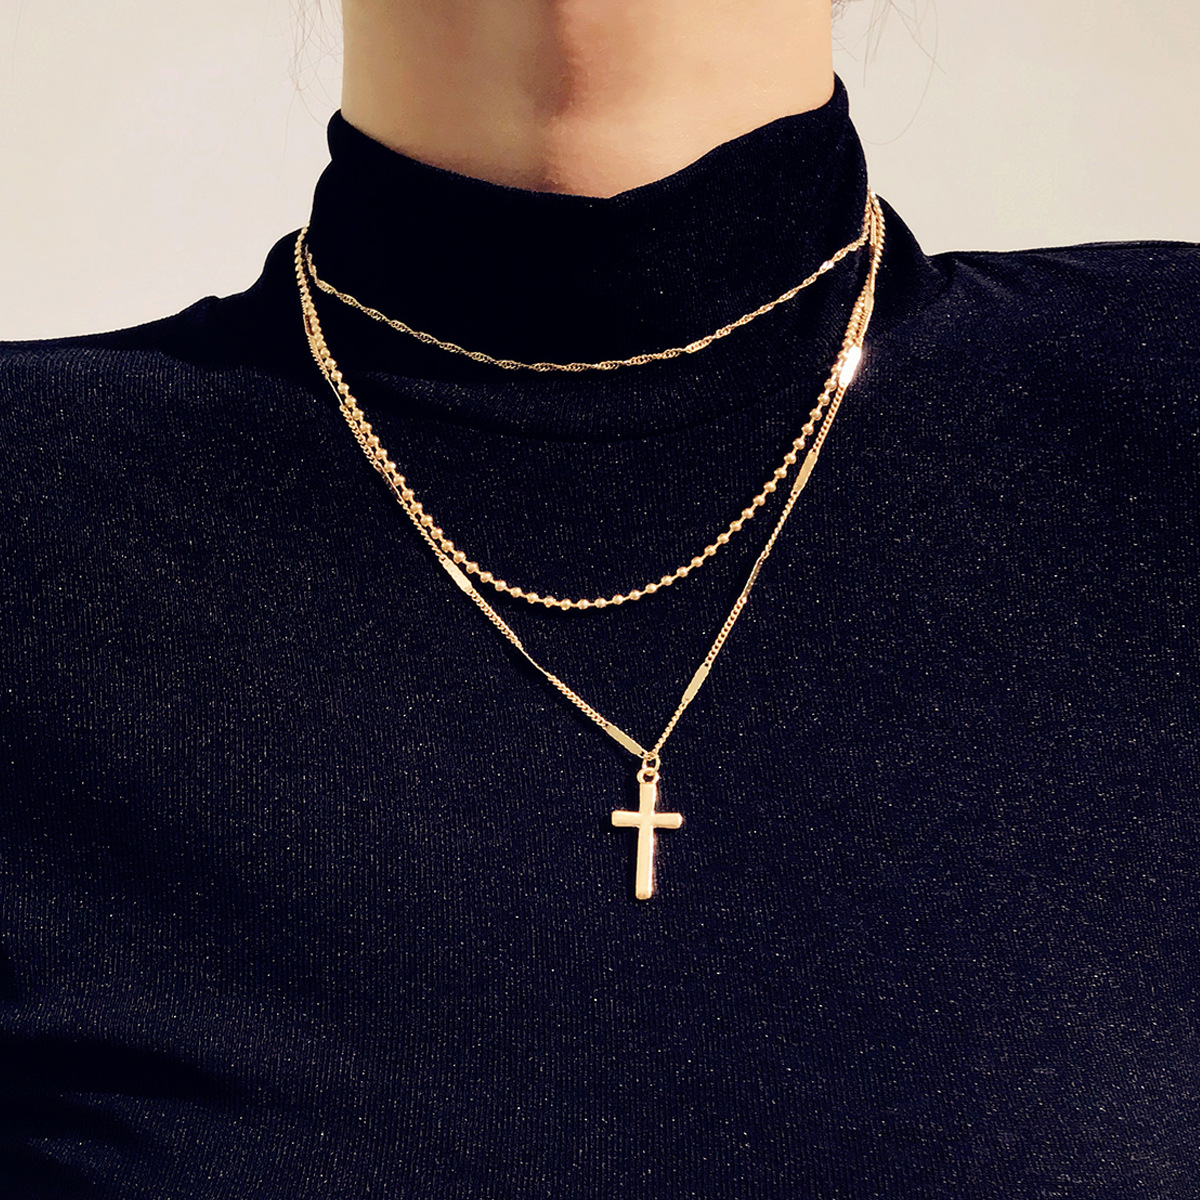 Jewelry Retro Cross Multilayer Necklace Necklace Female Fashion Simple Business All-match Clavicle Chain